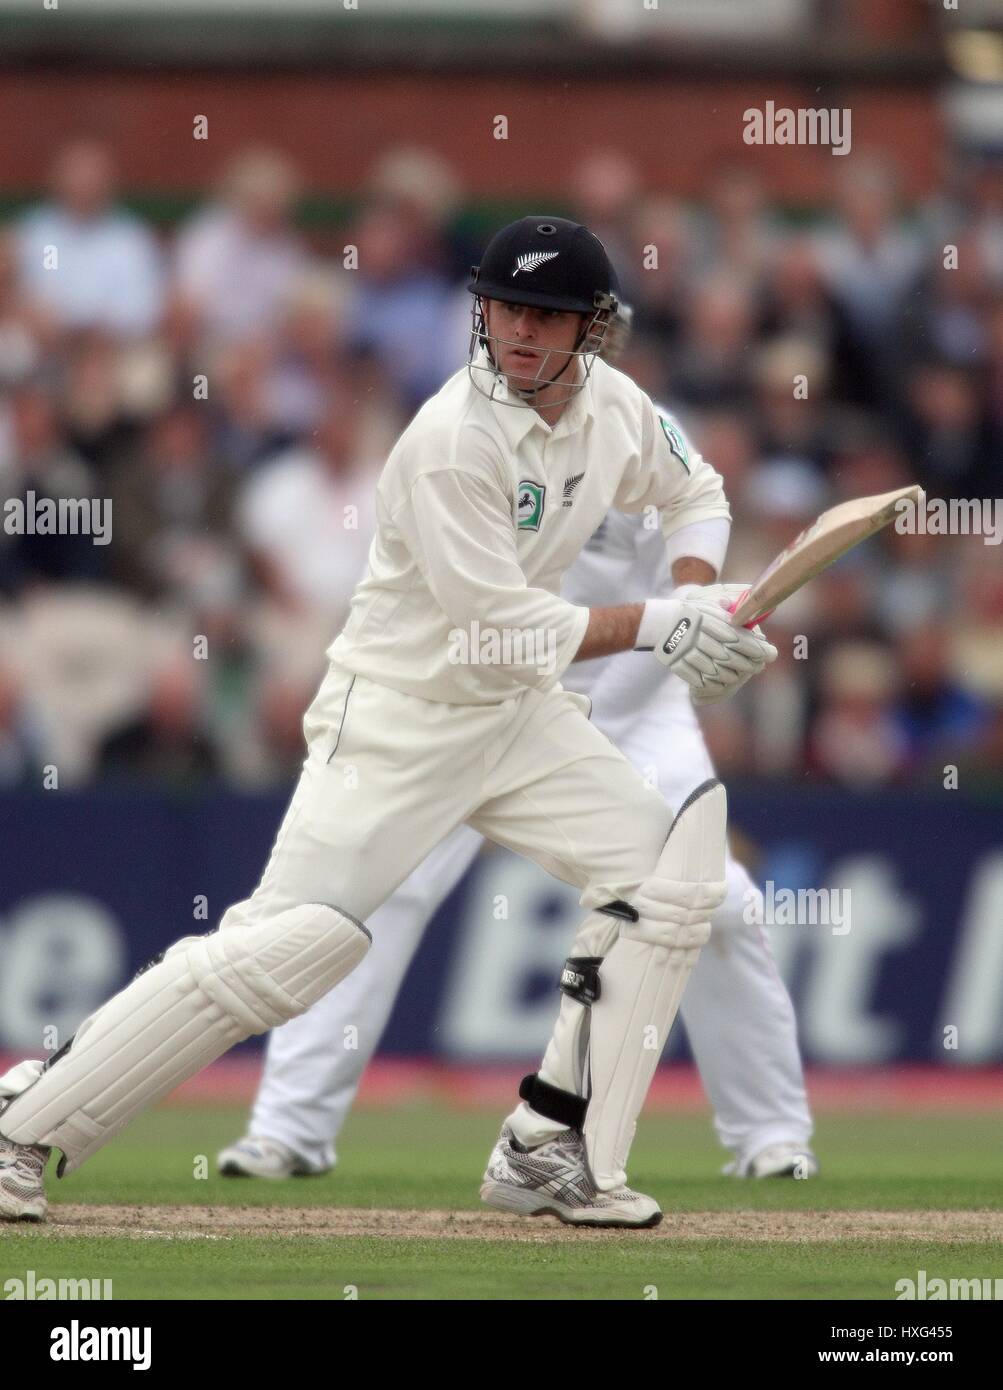 AARON REDMOND NEW ZEALAND OLD TRAFFORD MANCHESTER ENGALND 23 May 2008 Stock Photo